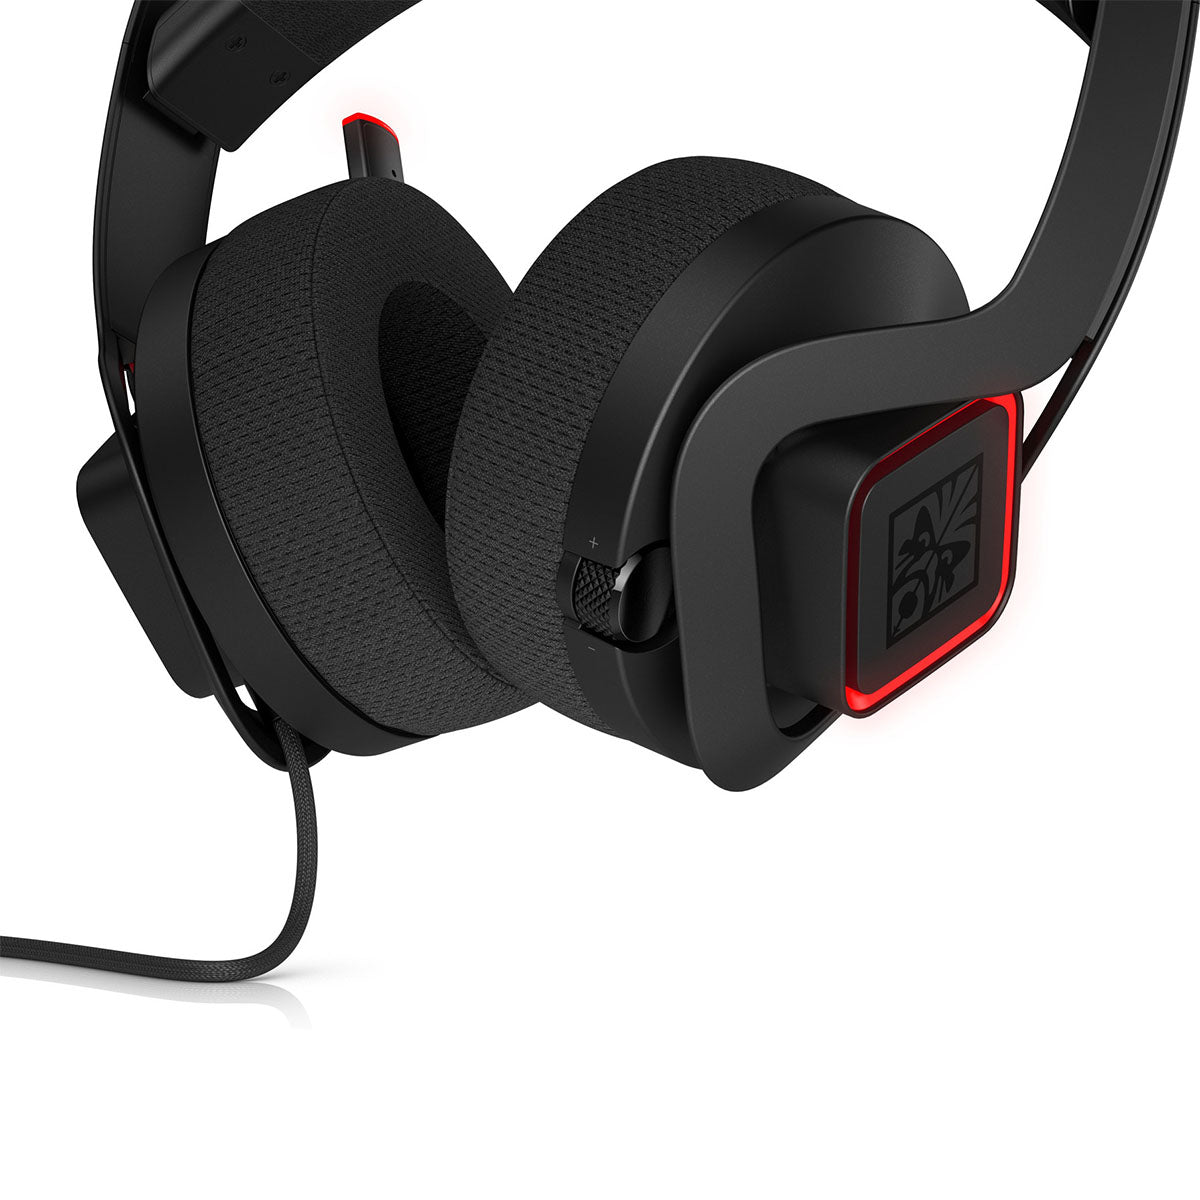 Omen by HP Mindframe Headset with Cooling Technology (3XT27AA)